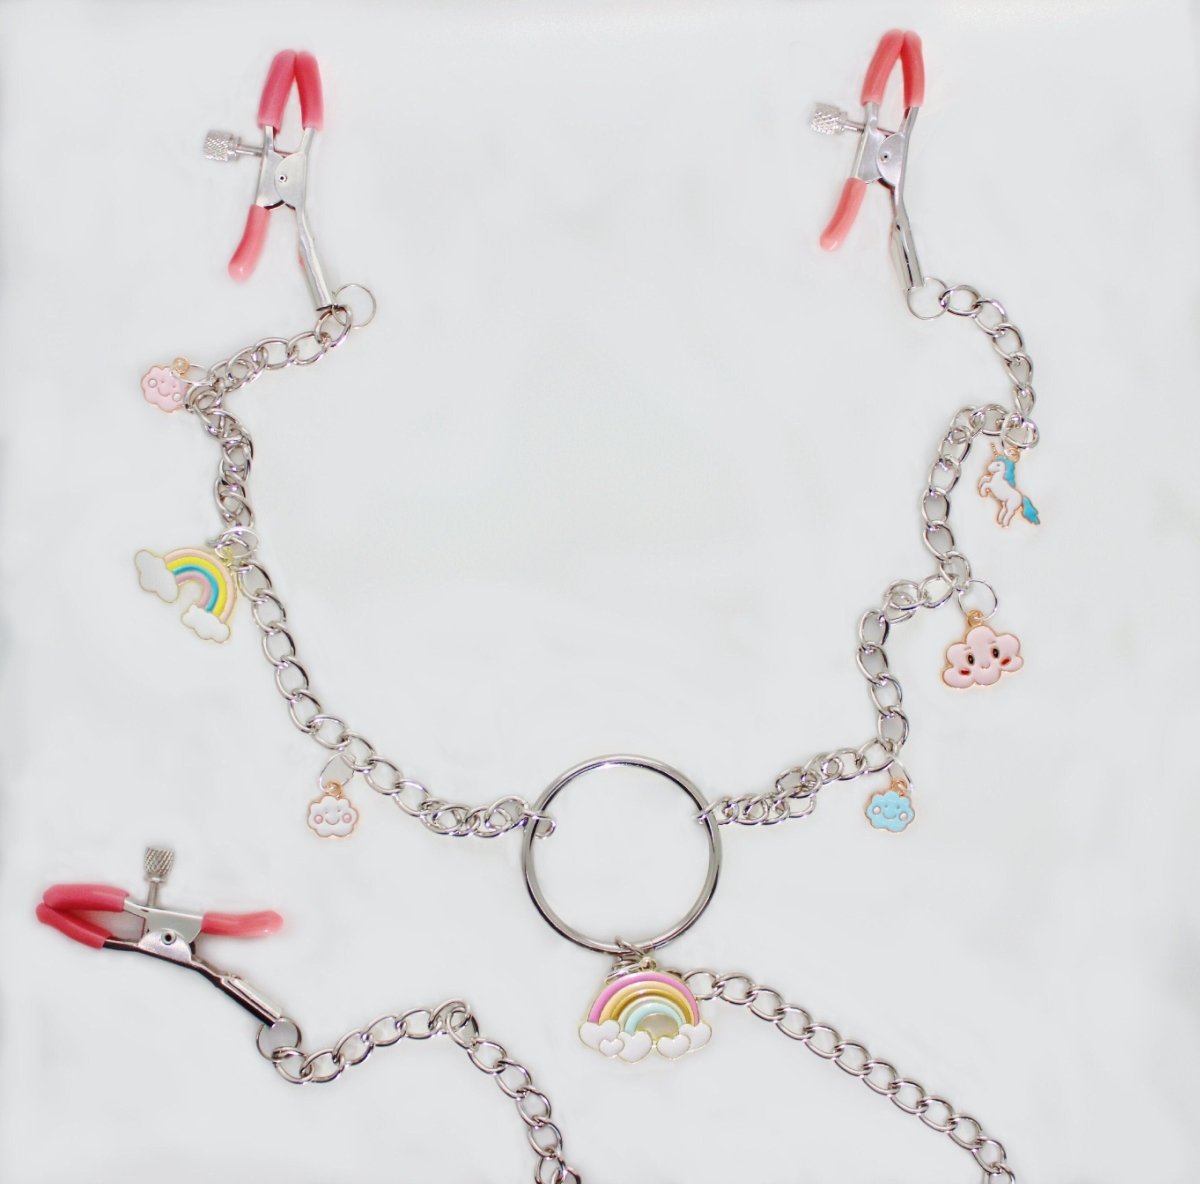 3 chain nipple and clit adjustable screw clamps with rainbow, cloud, and unicorn charms